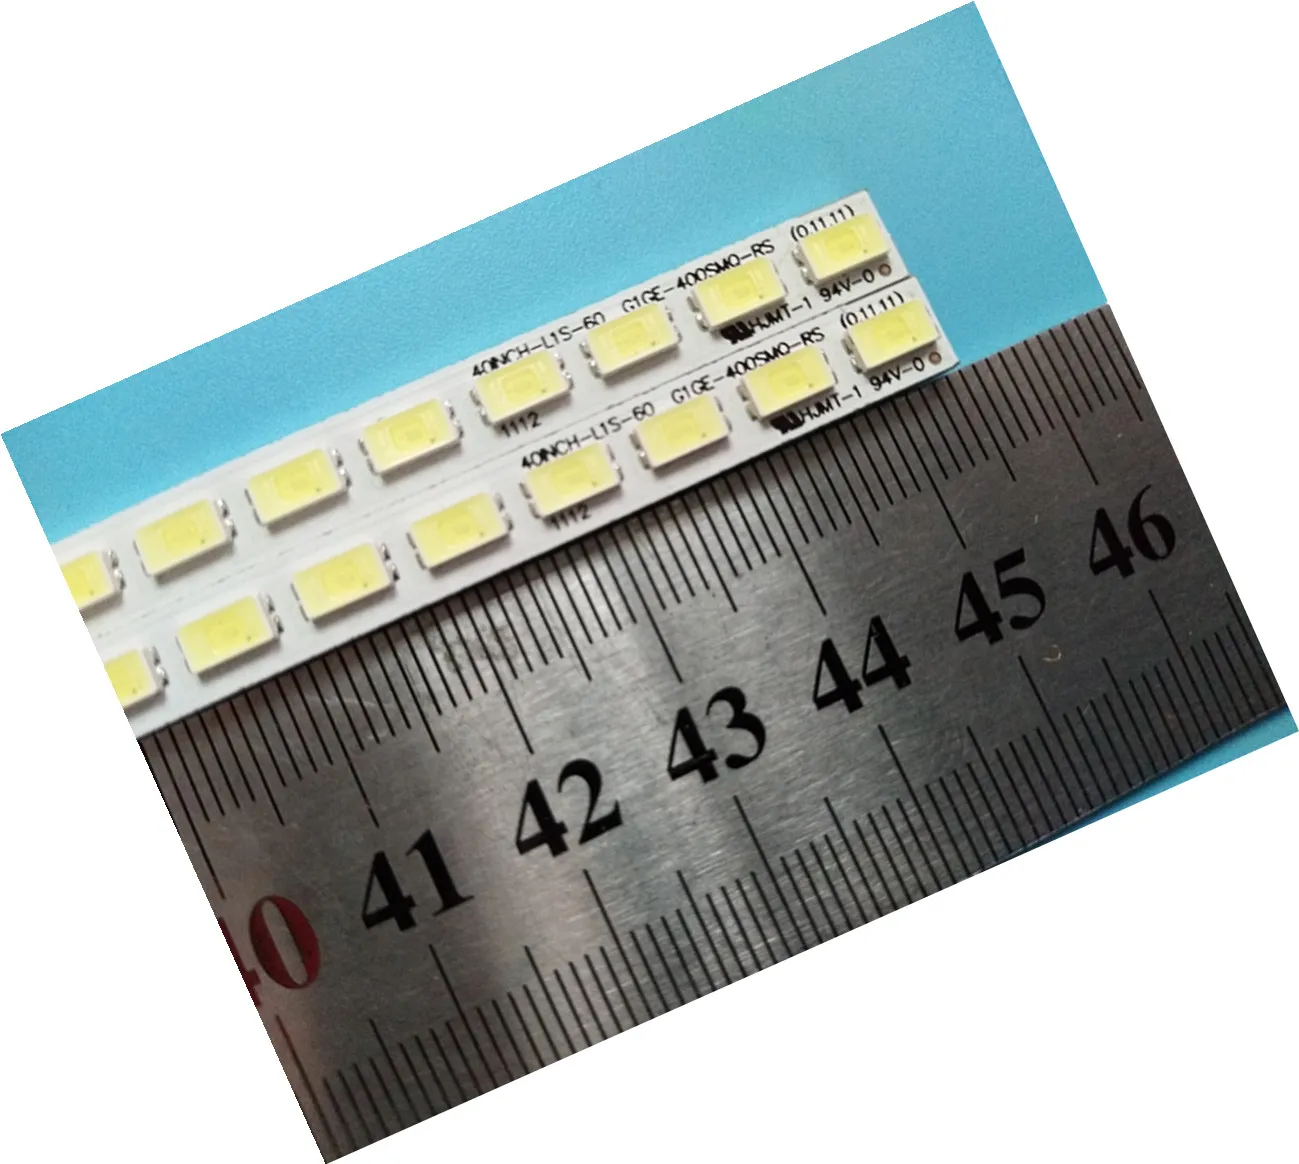 

Beented Part NEW 50 PiecesX60LED 40INCH-L1S-60 LED back strip for LTA400HM13 40-DOWN LJ64-03029A 455mm